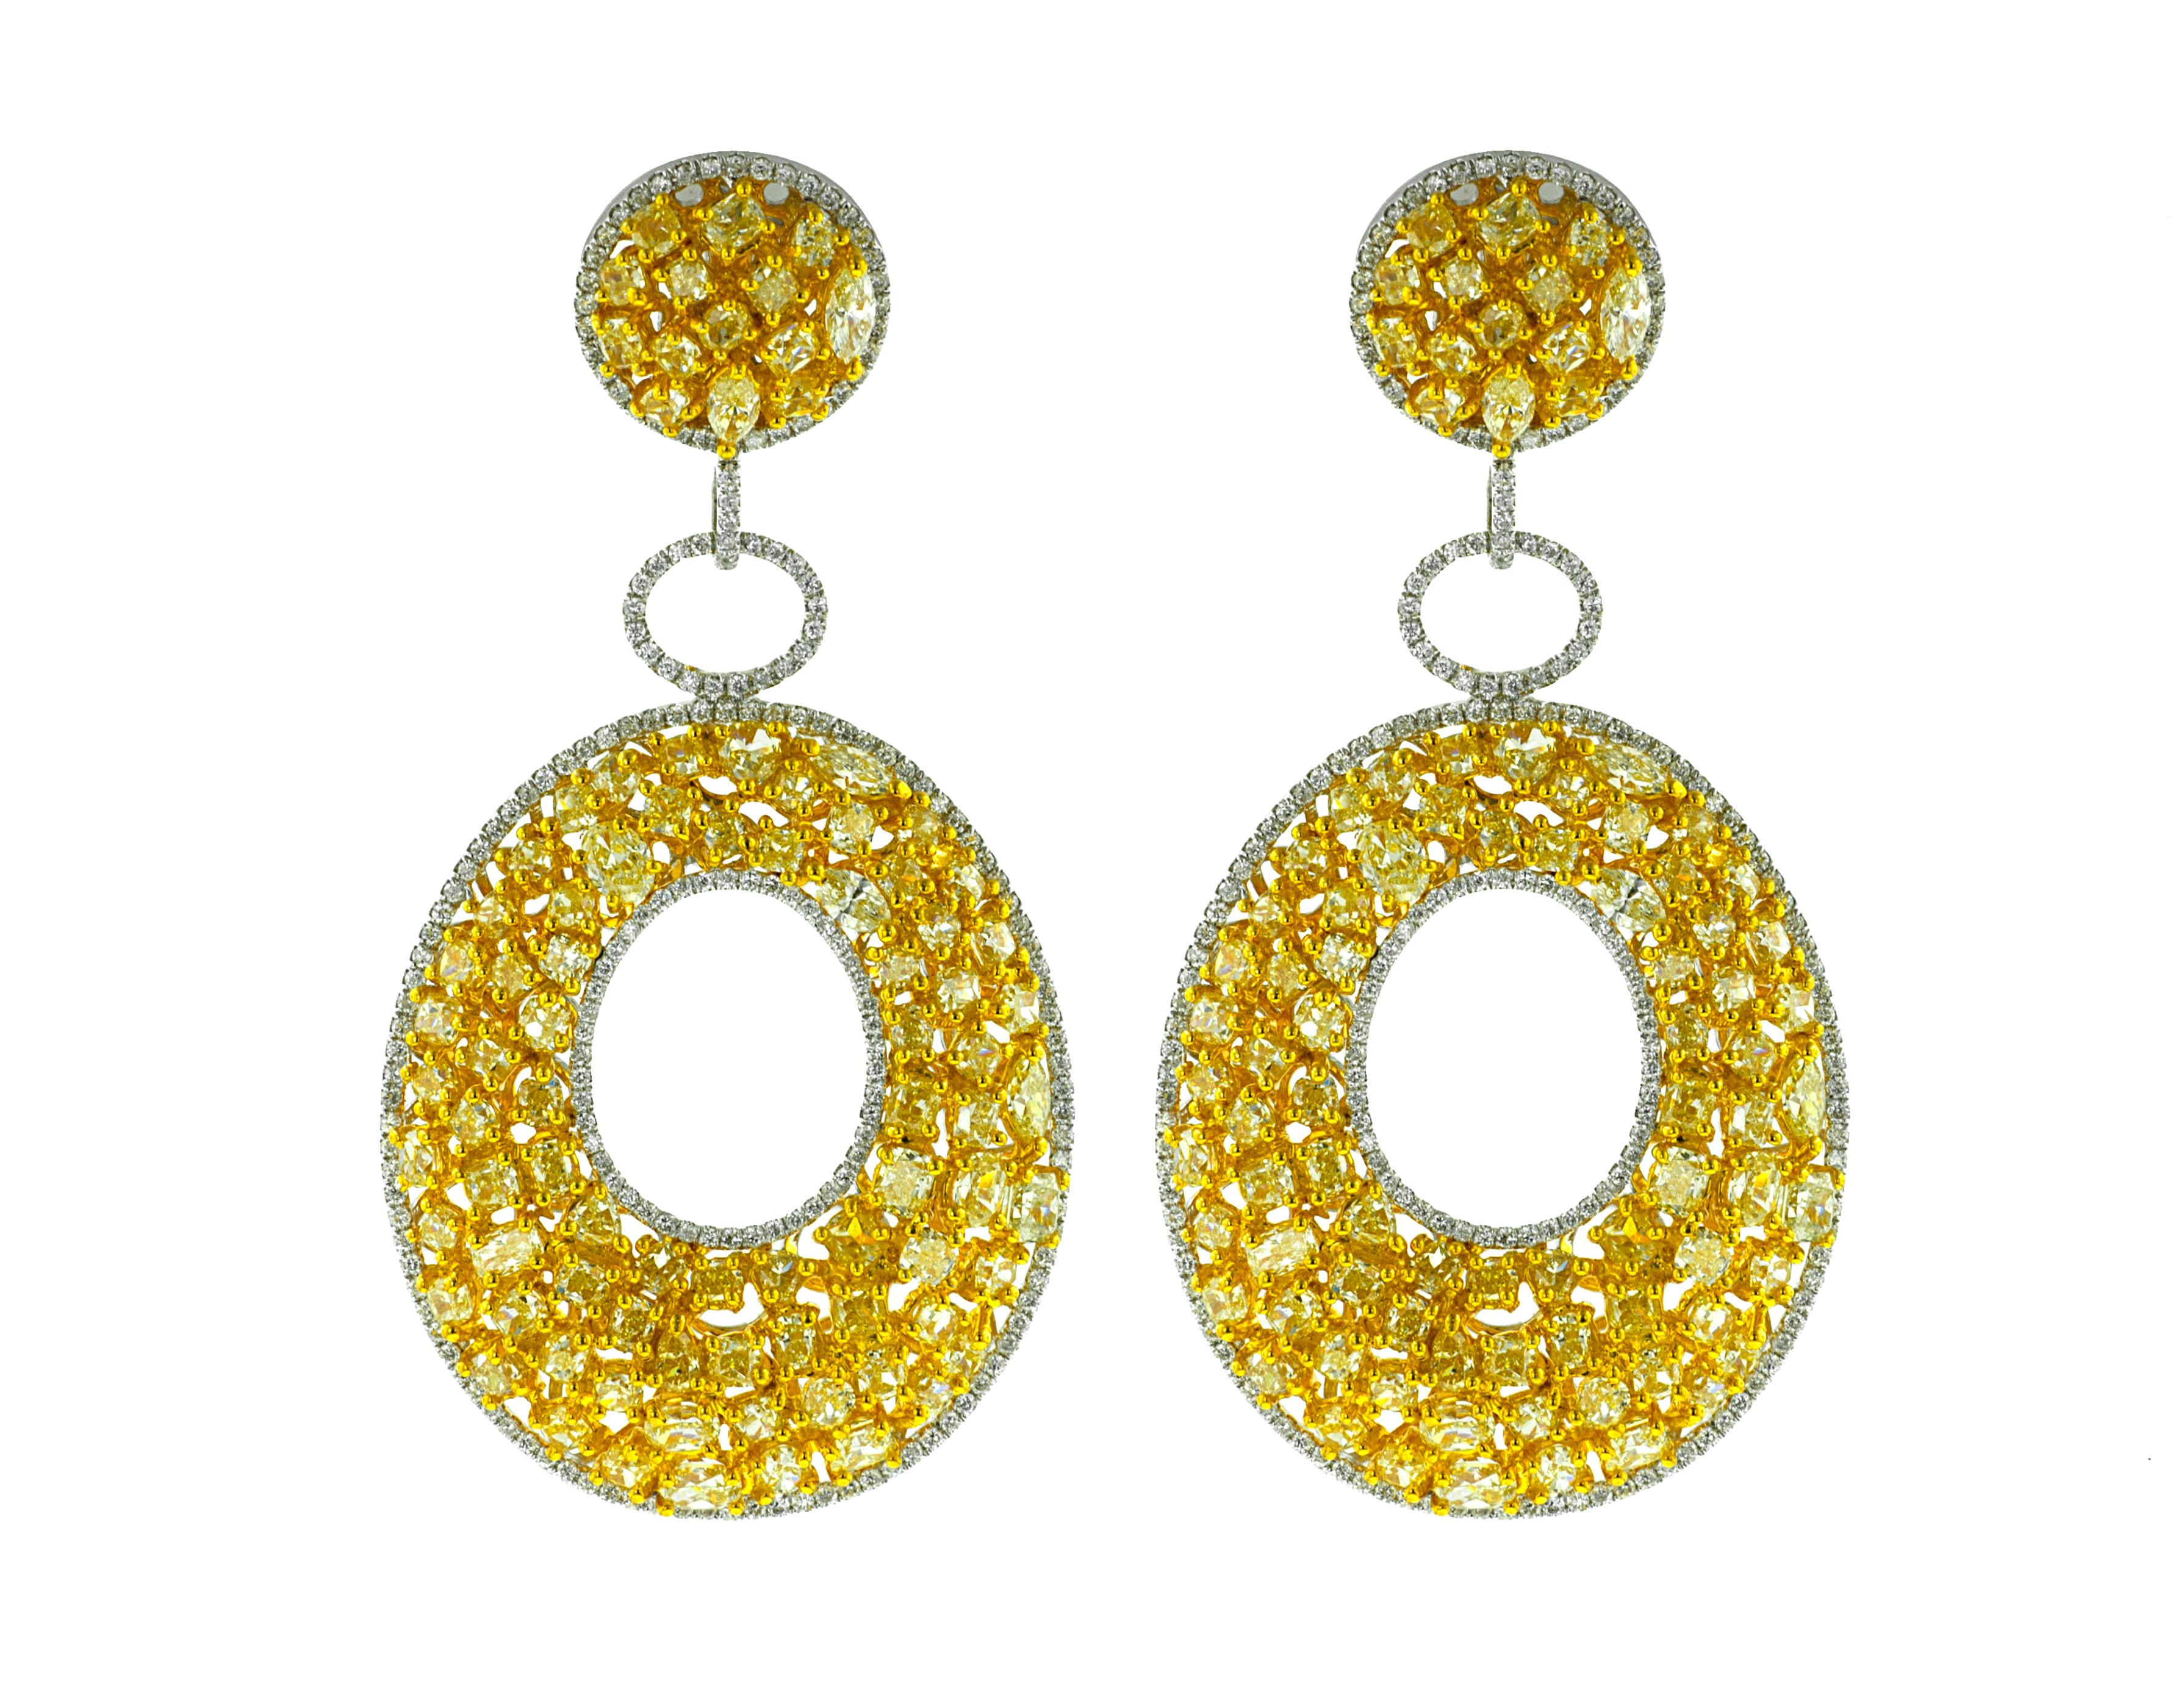  18 kt white and yellow gold fancy diamond earrings containing 20.12 cts tw of yellow and white diamonds.
Diana M. is a leading supplier of top-quality fine jewelry for over 35 years.
Diana M is one-stop shop for all your jewelry shopping, carrying